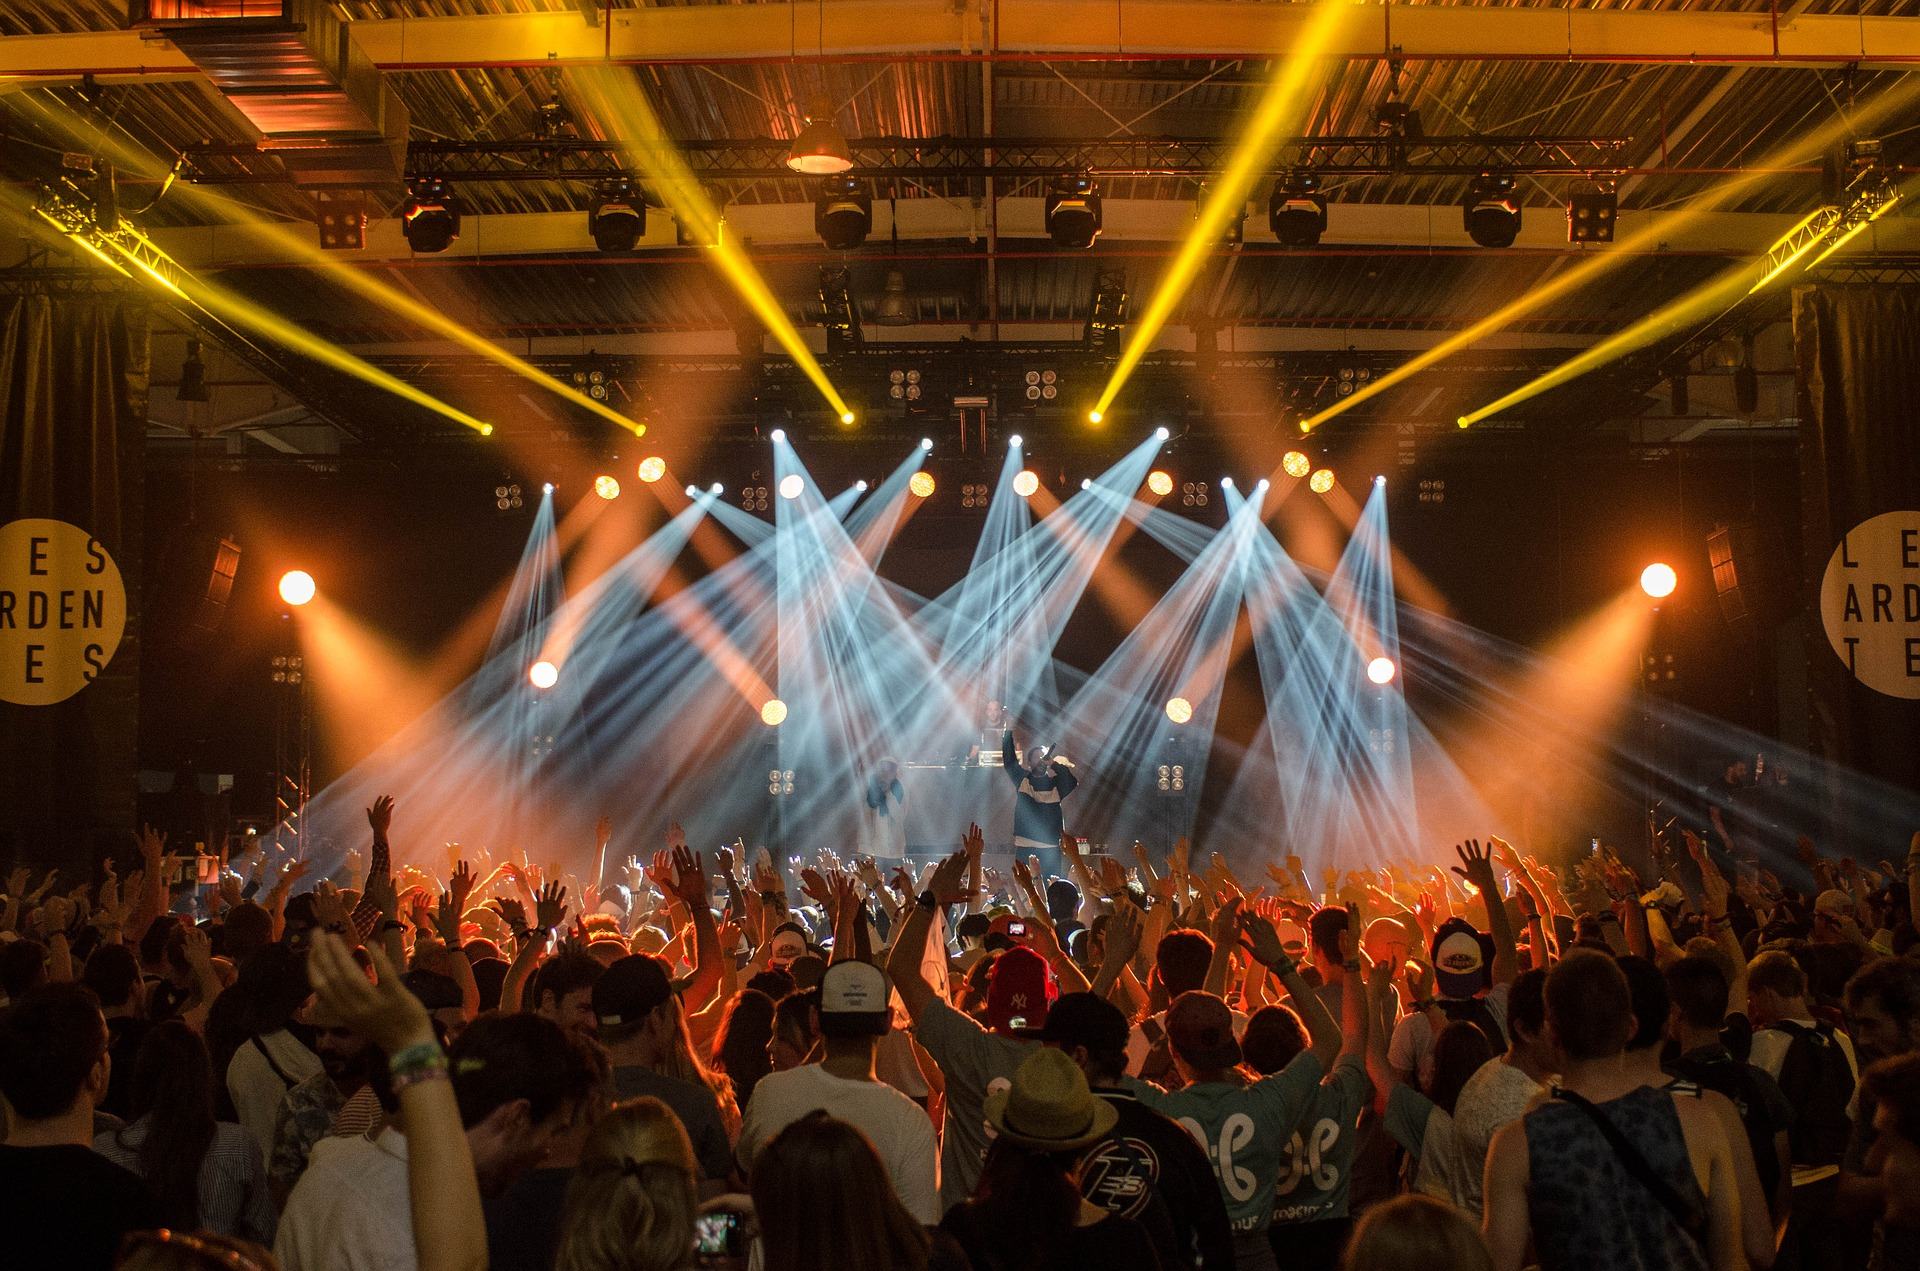 Five Strains to Try for Improving Your Concert High